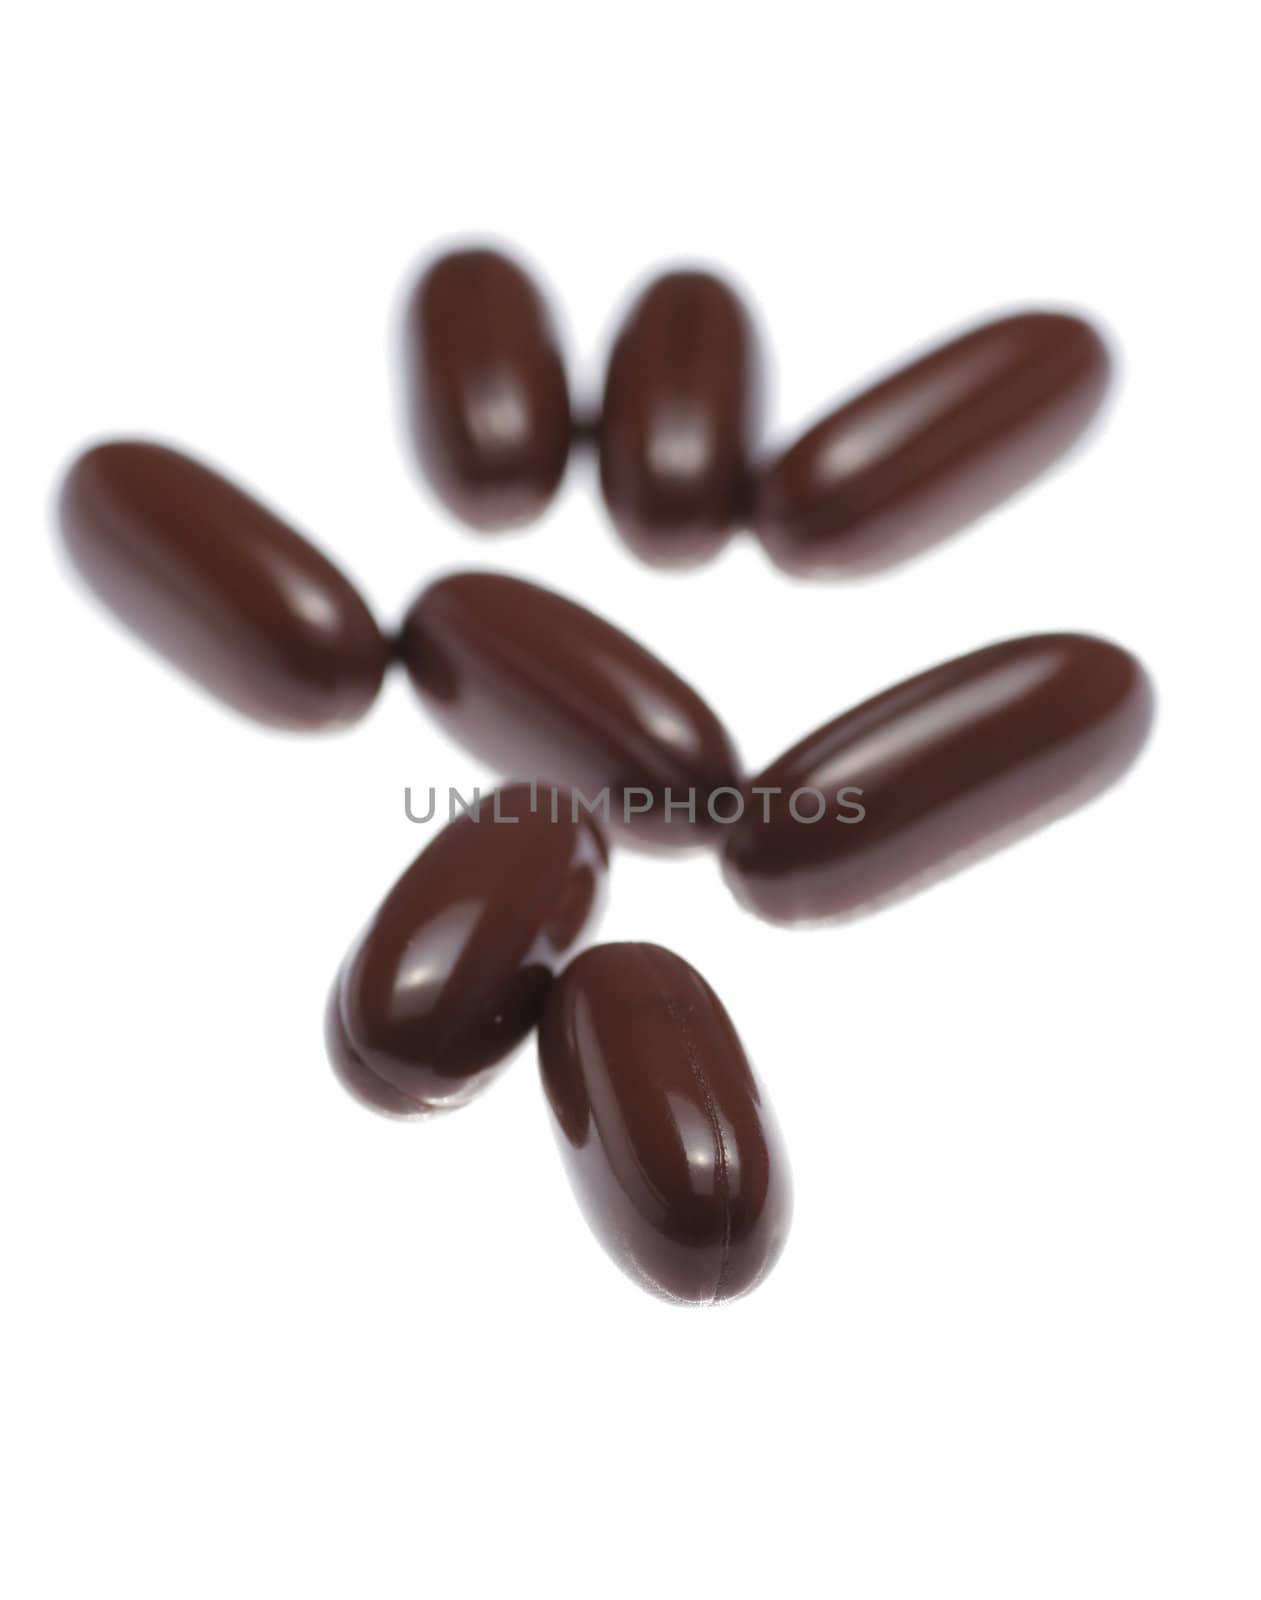 Brown Pills On White Background, Close-Up Shot, Focus On Front